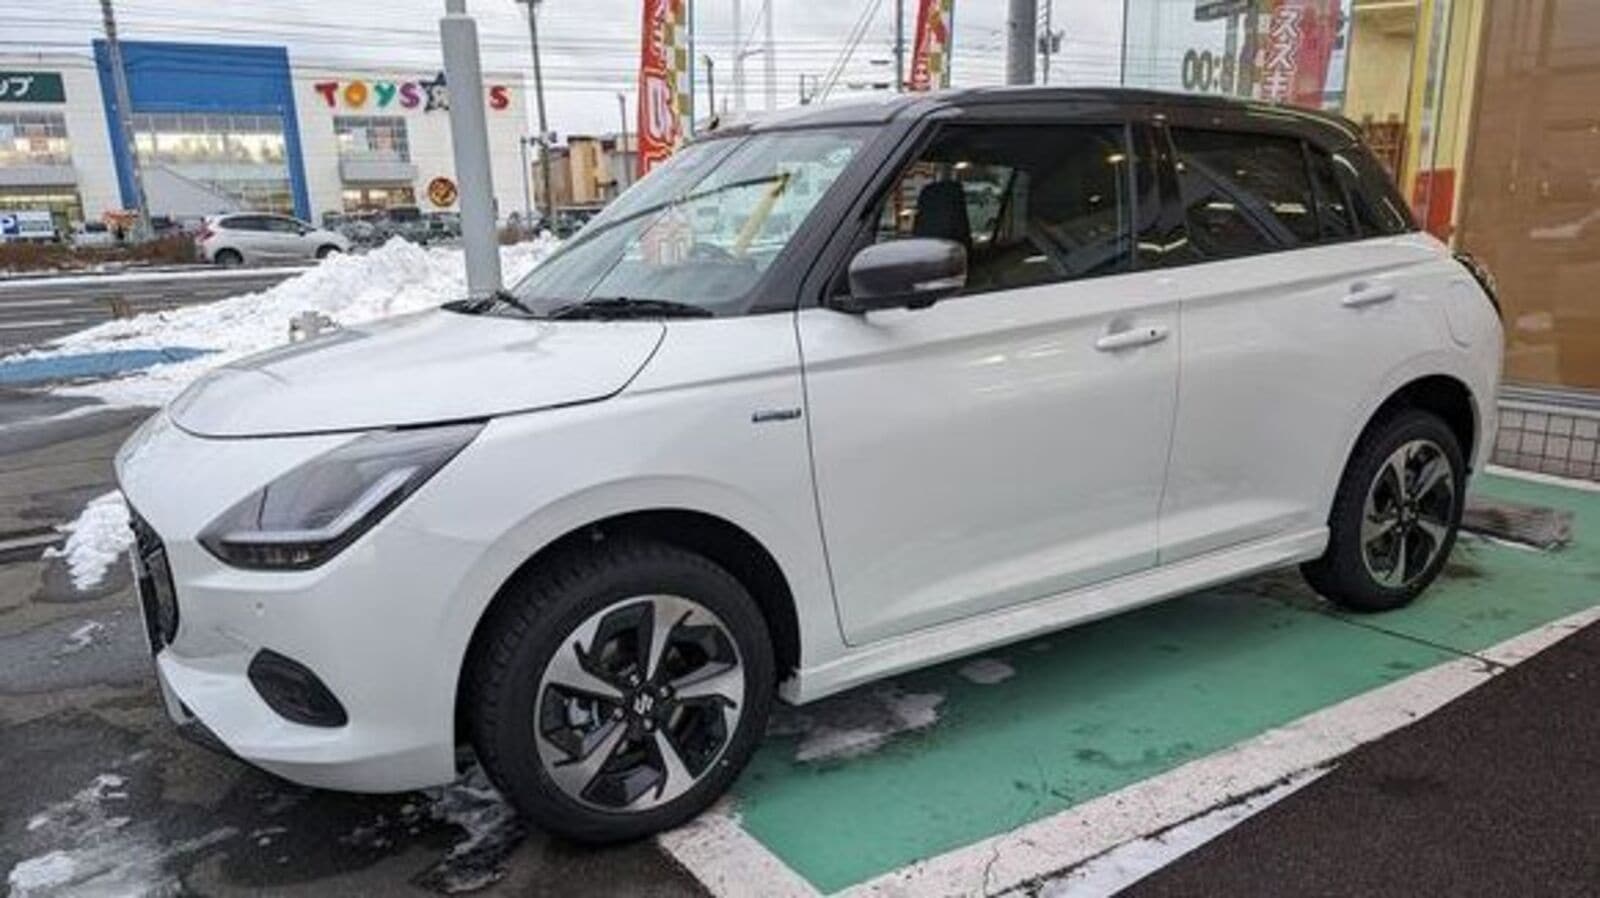 2024 Suzuki Swift arrives at showrooms in Japan. Check out reallife